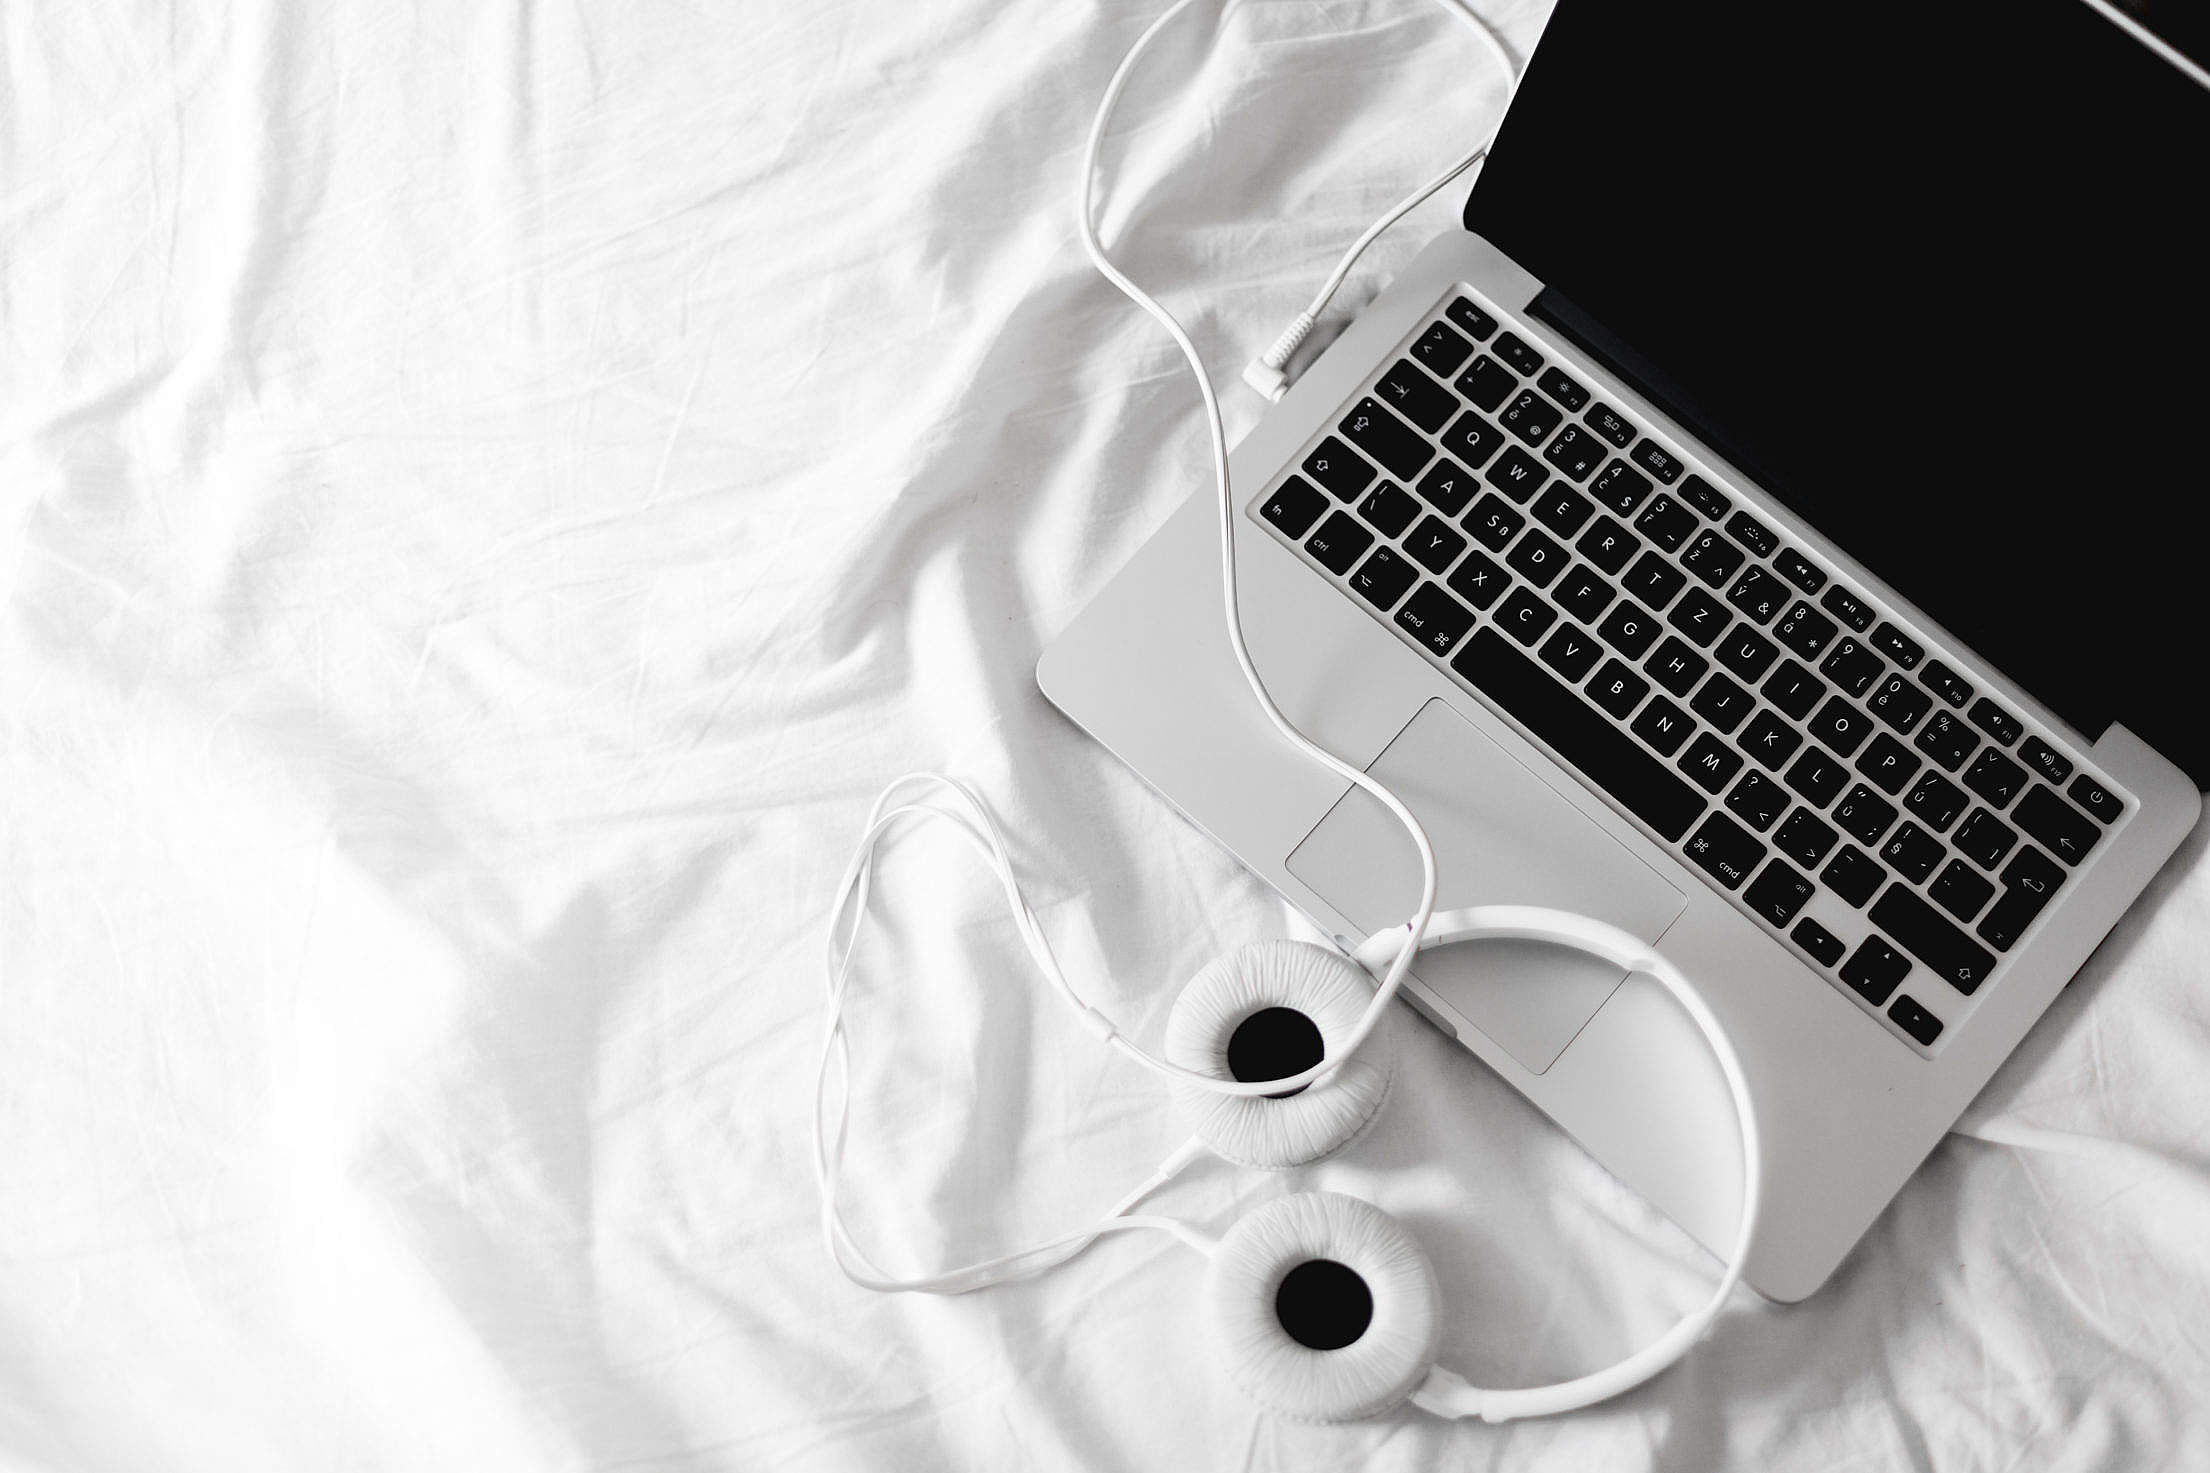 Listening Streaming Music in Bed Headphones Free Stock Photo